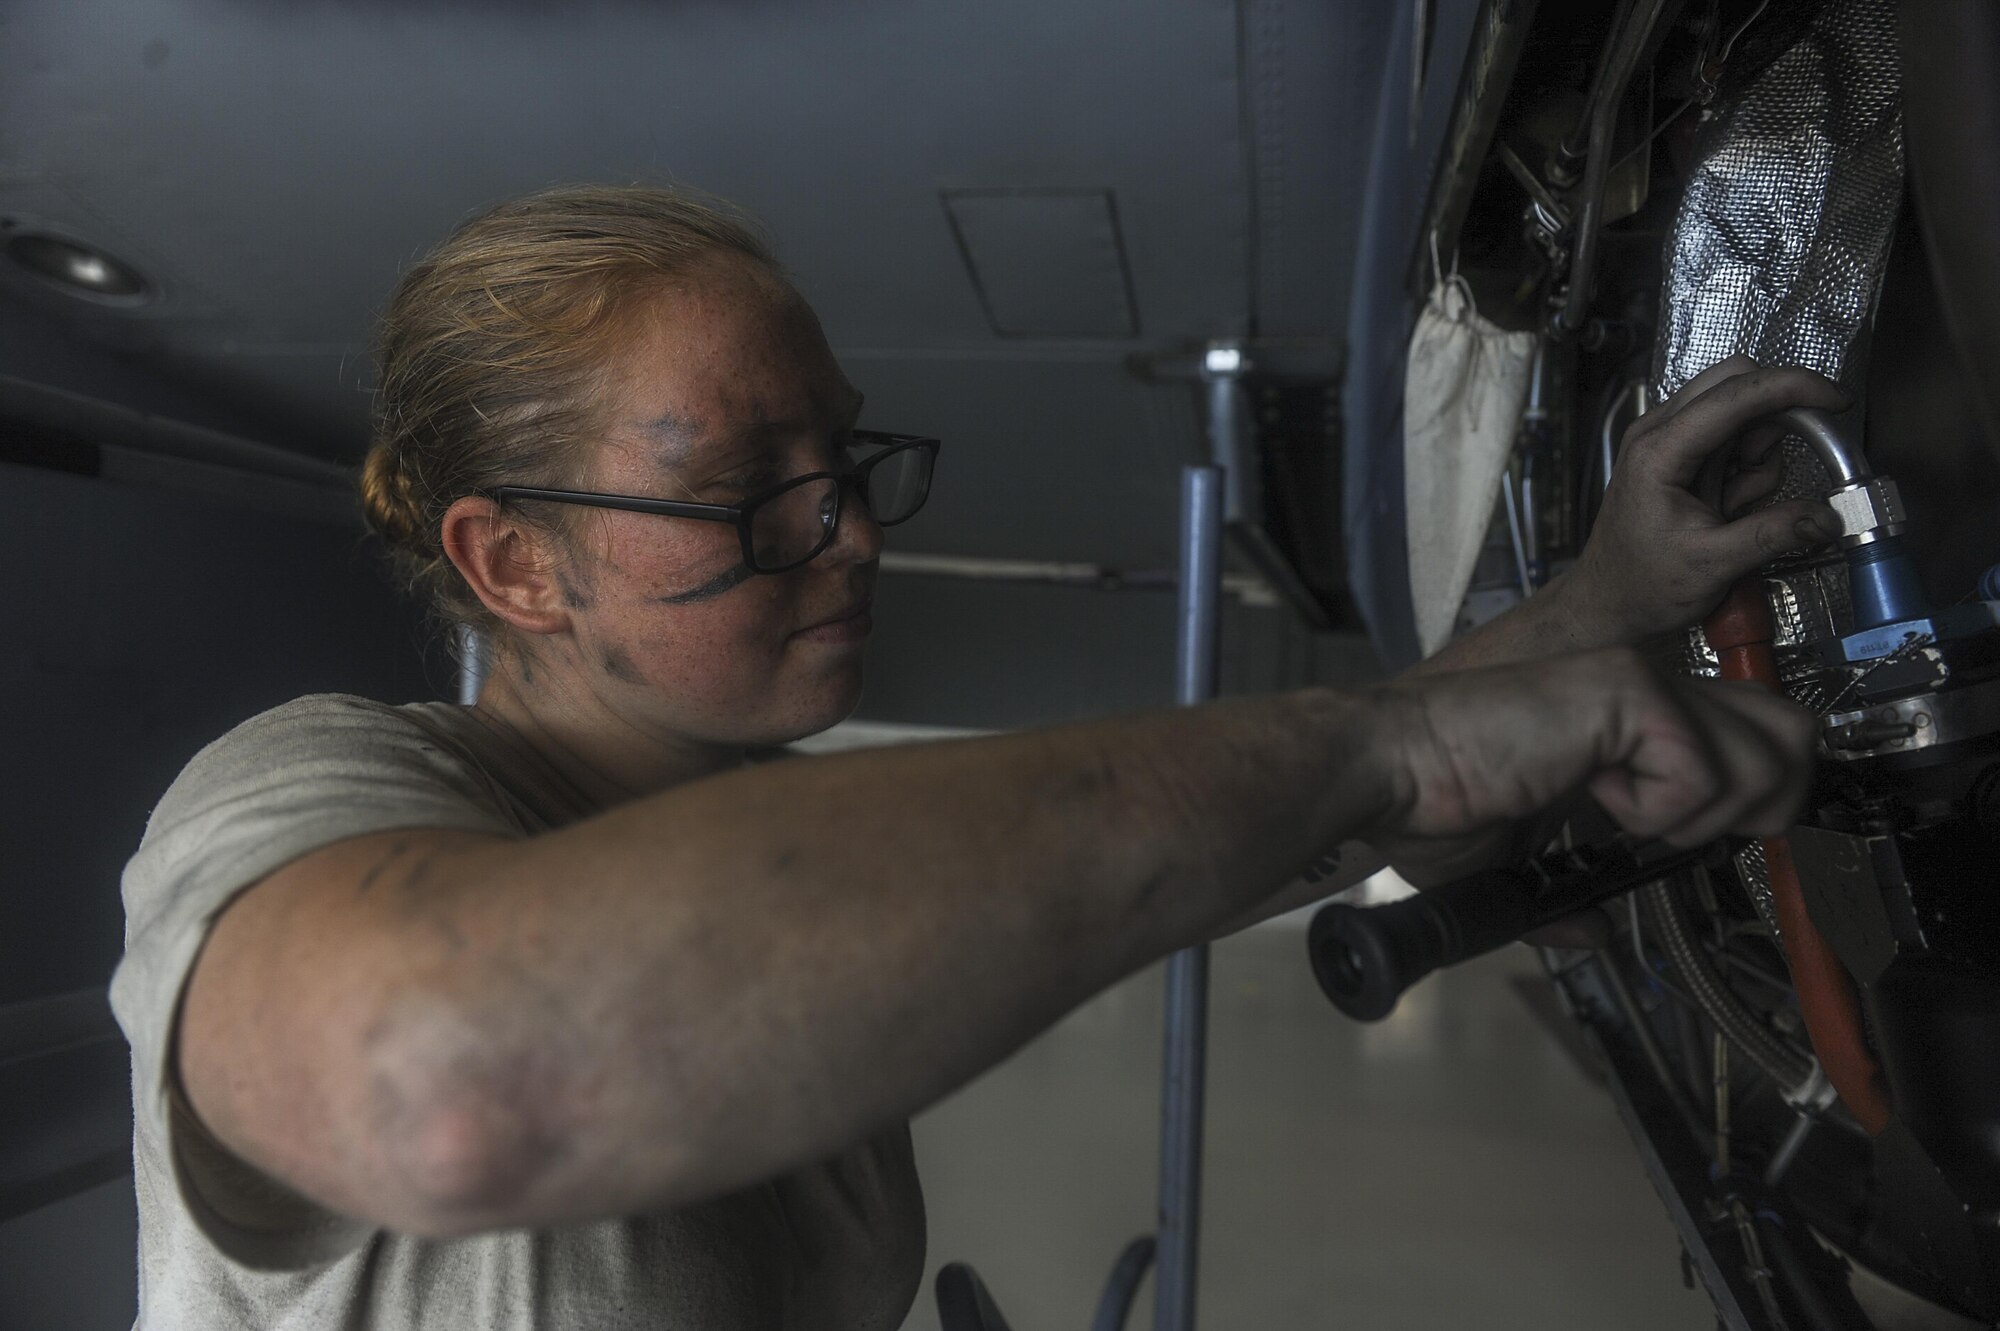 Senior Airman Maggie Jakaitis, an aerospace propulsion journeyman with the 1st Special Operations Aircraft Maintenance Squadron, safety wires a fuel nozzle on an AC-130U Spooky gunship at Hurlburt Field, Fla., July 6, 2017. Aerospace propulsion technicians test, maintain and repair AC-130U engines, preparing them to execute the mission any time, any place. (U.S. Air Force photo by Airman 1st Class Rachel Yates)